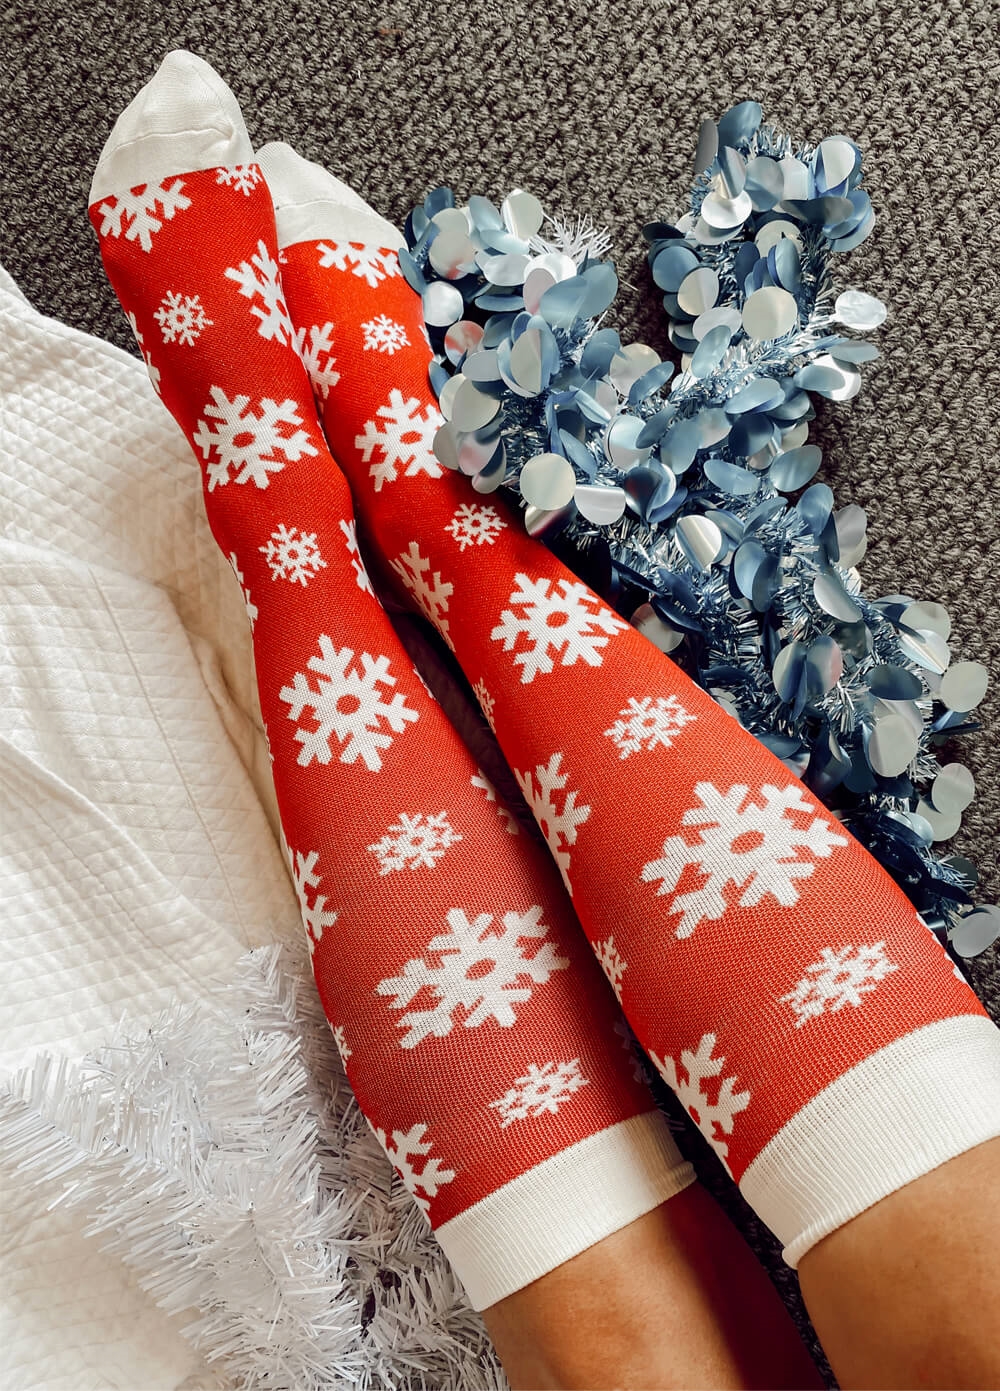 Mama Sox - Excite Maternity Compression Socks in Red Snowflake